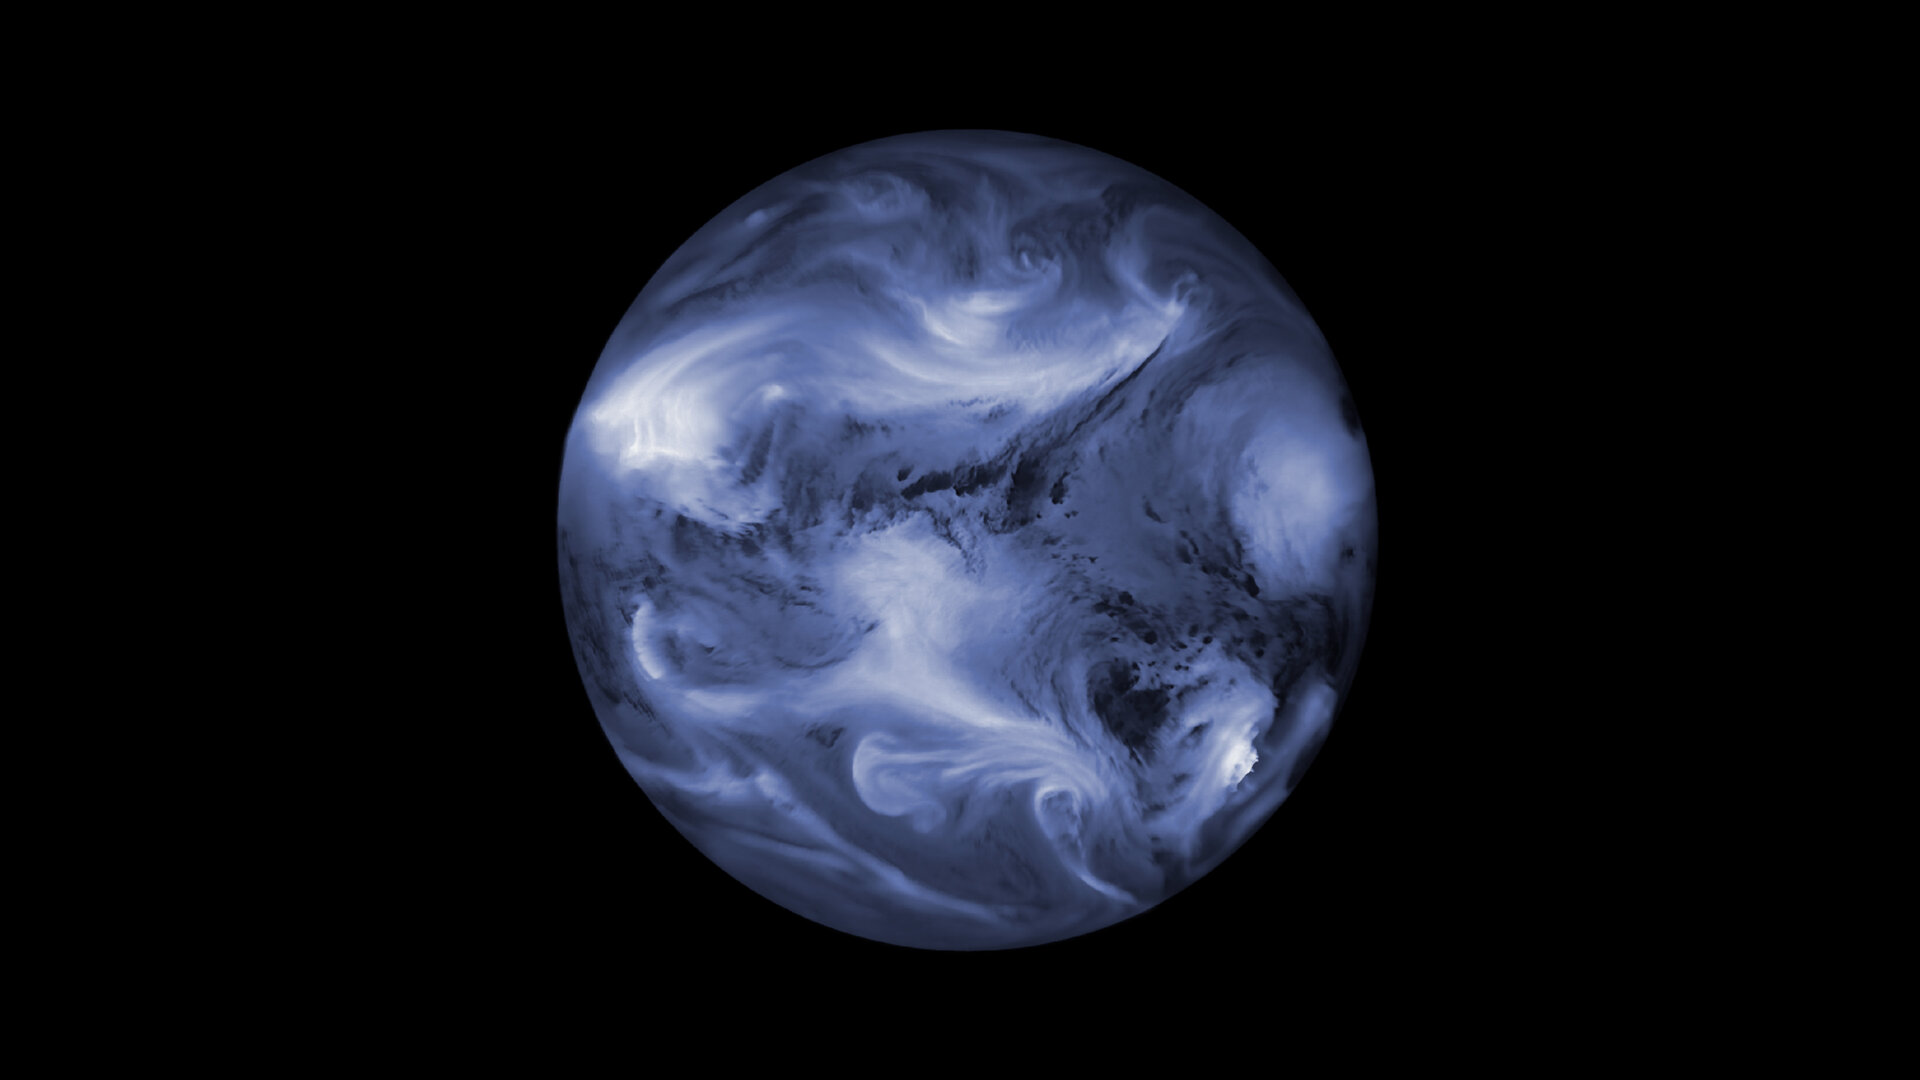 Meteosat image showing water vapour in Earth's atmosphere